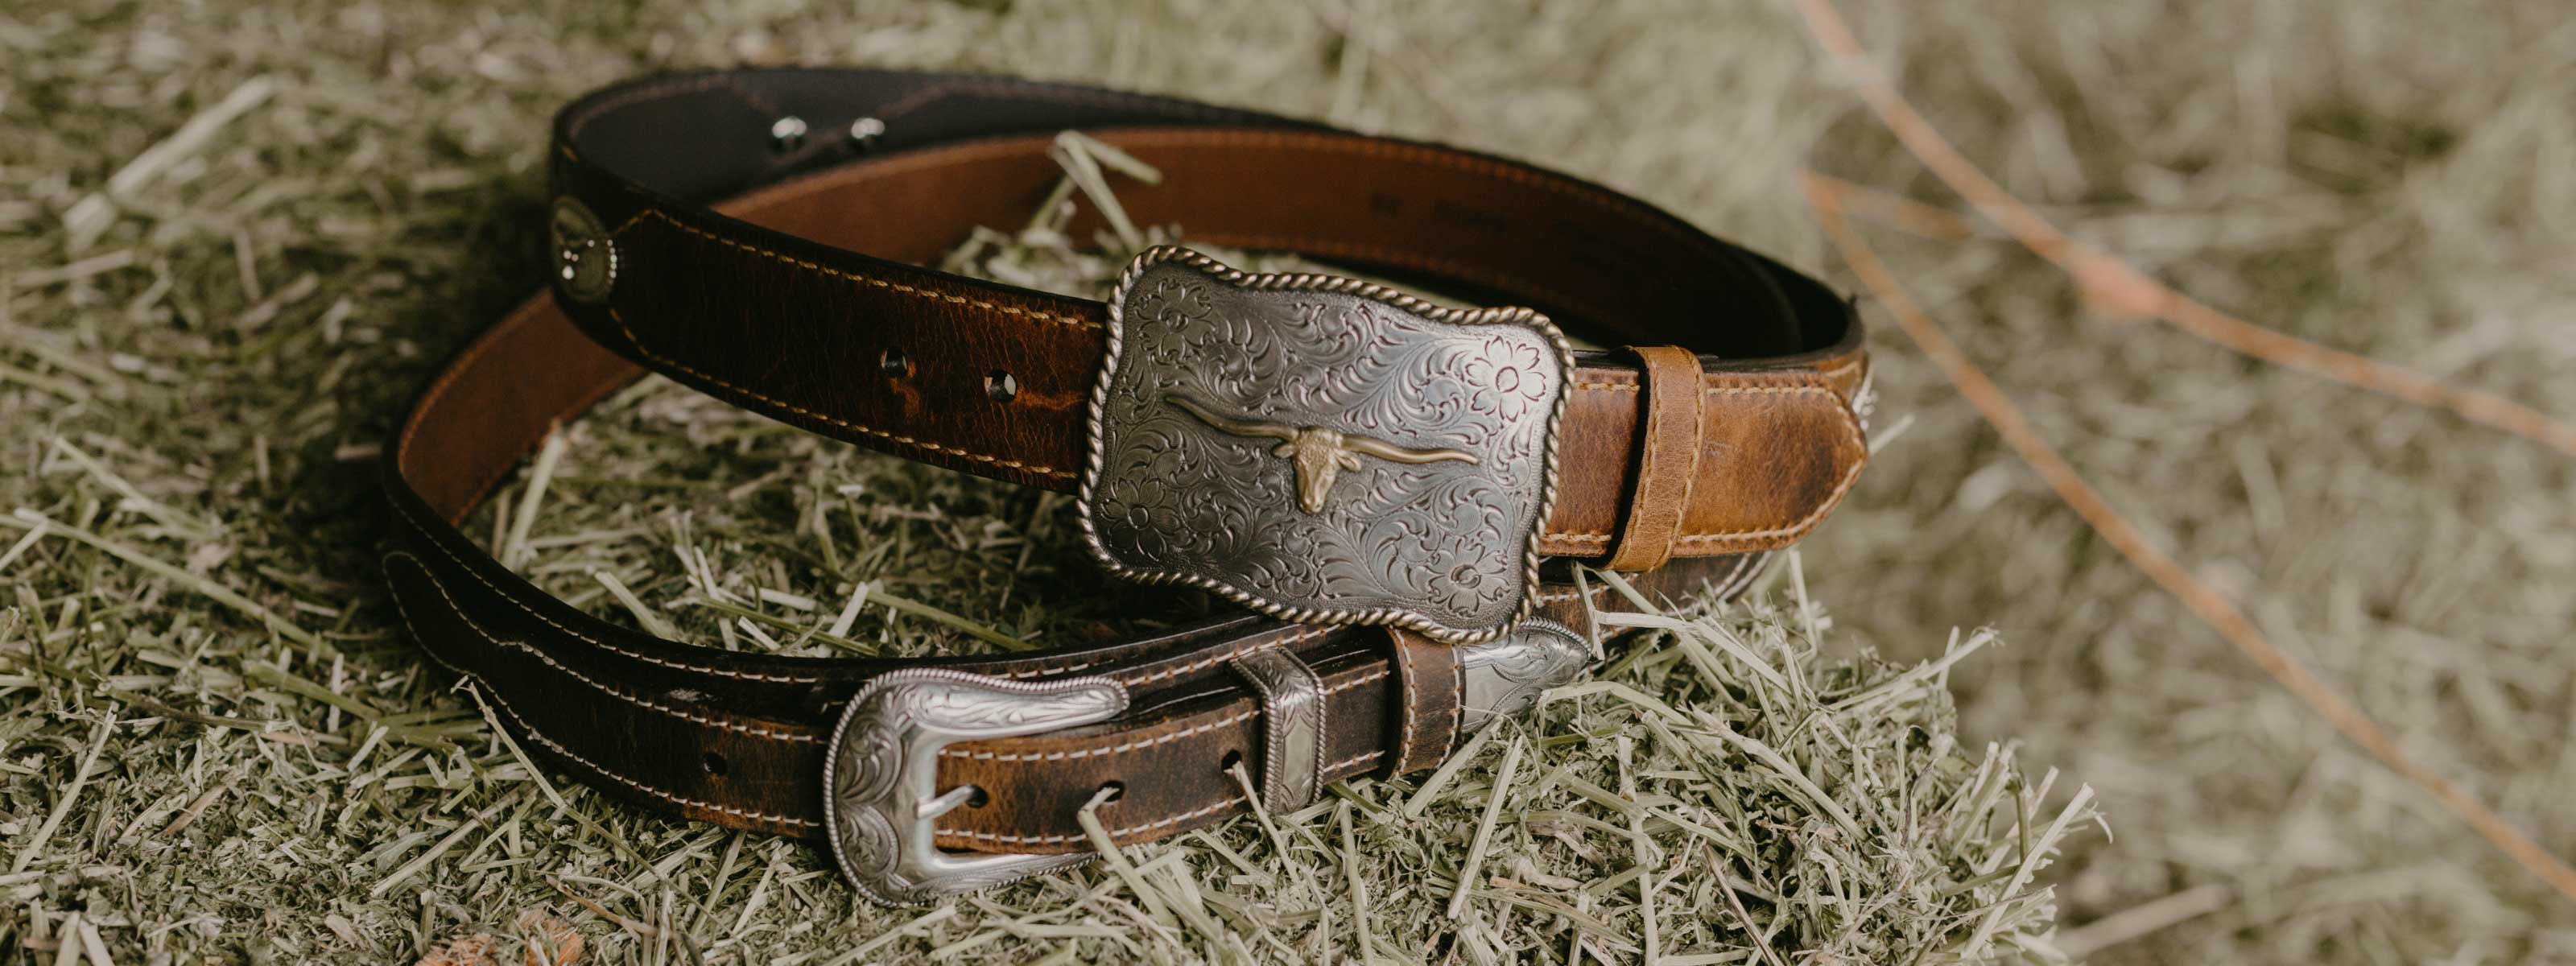 Vintage Bison Belts - Crafted from American Bison Leather - Manufactured in the USA